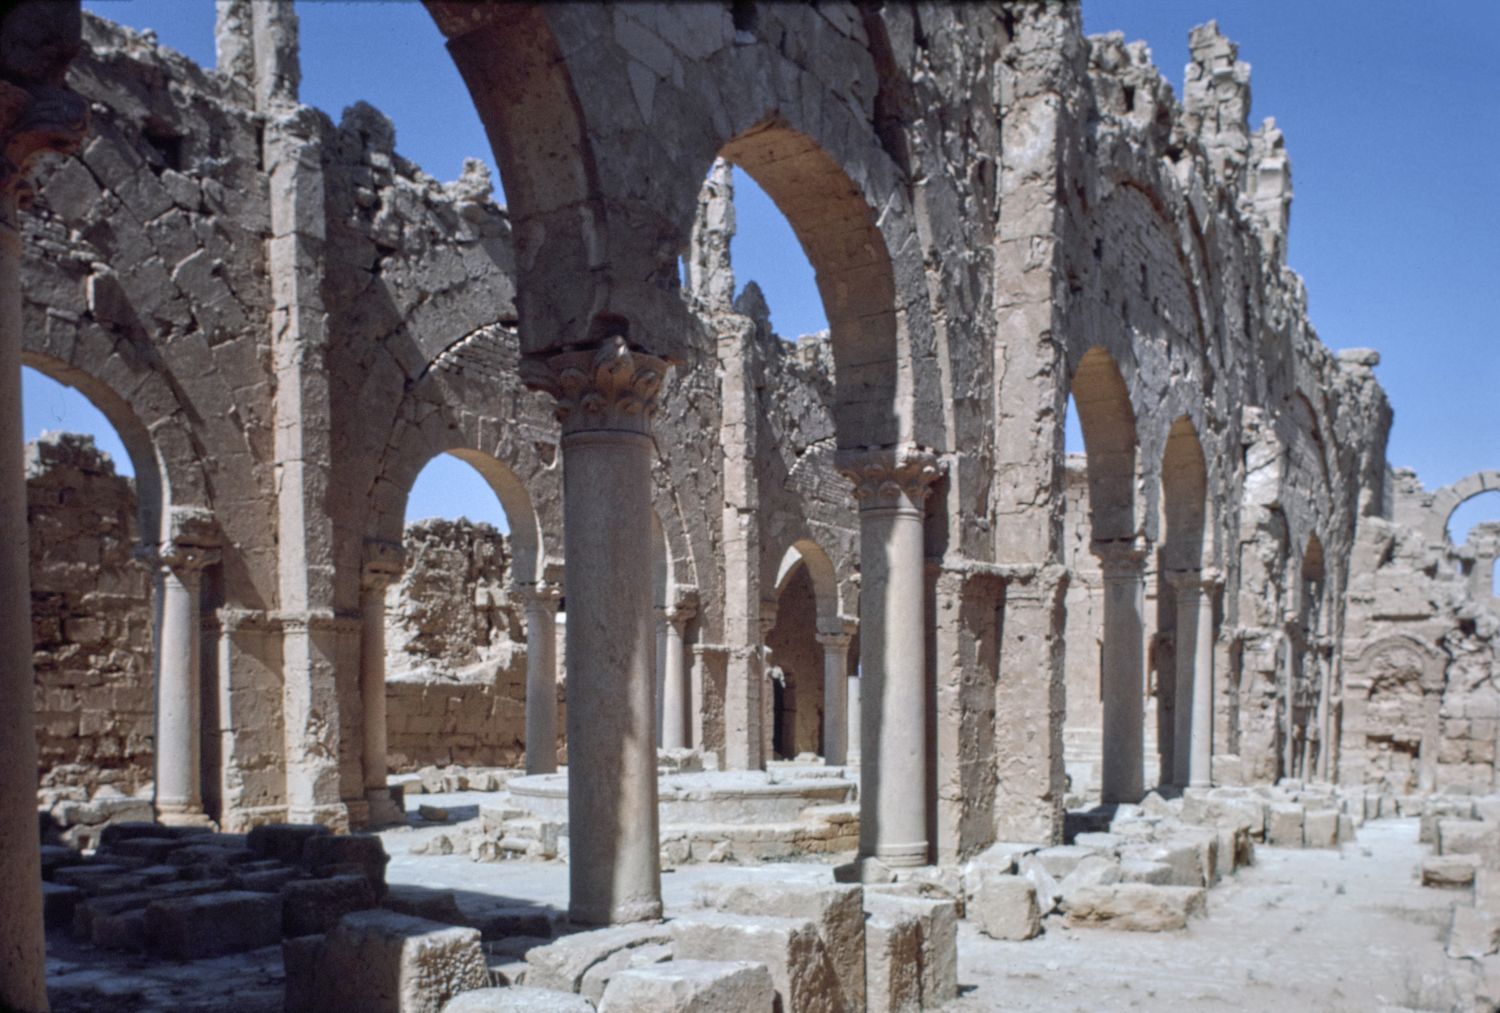 View of arcades framing nave, from southern side aisle looking northeast.